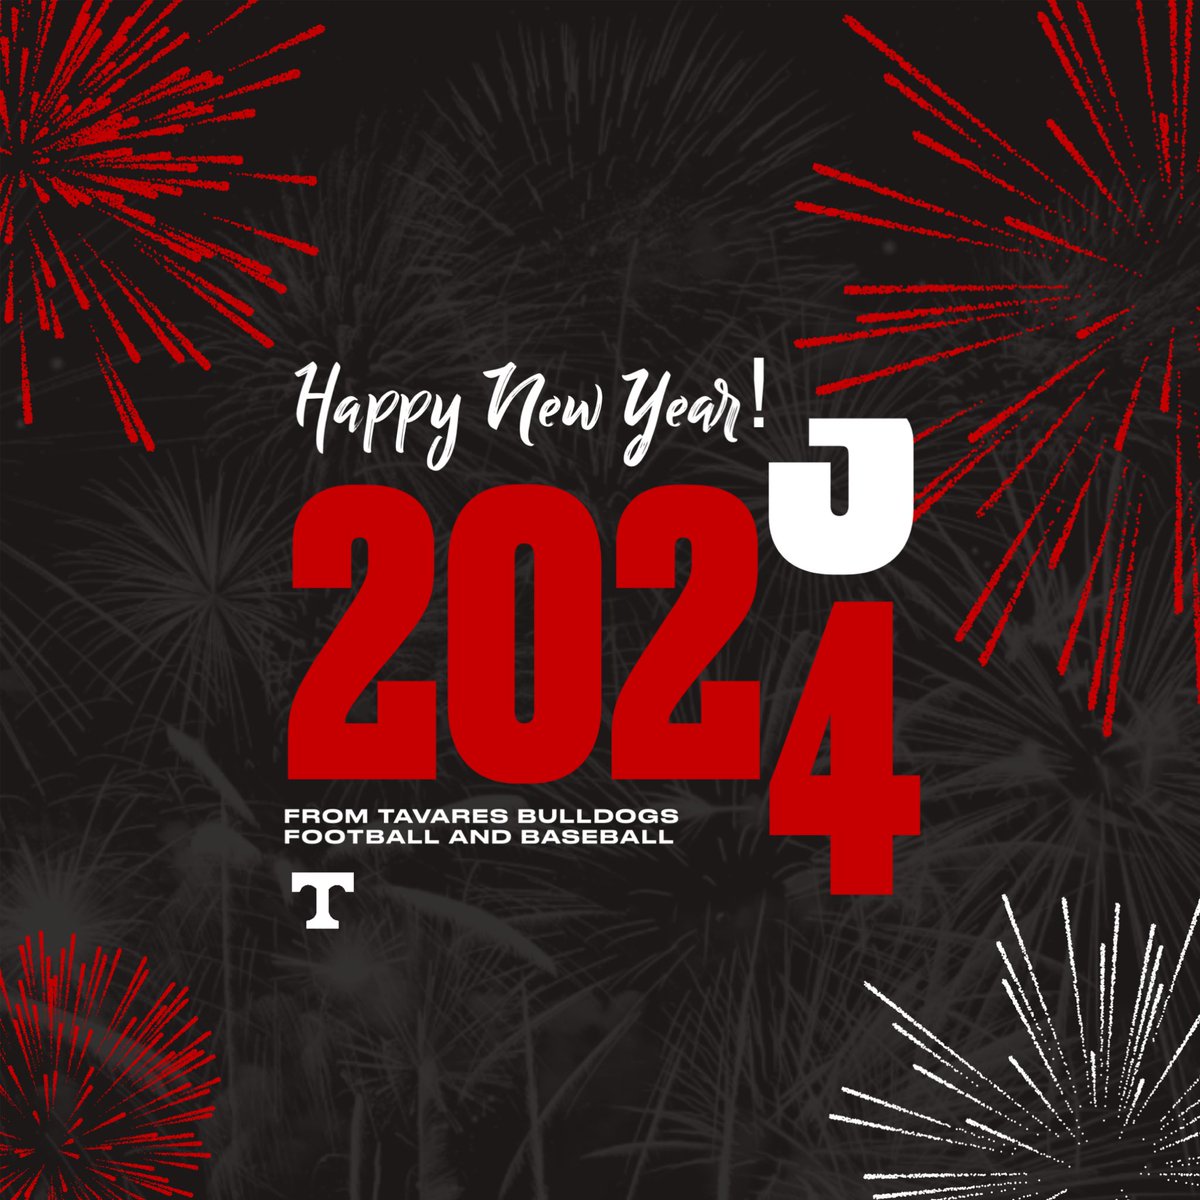 Here’s to wishing you and yours a very Happy New Year! Big things are ahead for your @FootballTavares and @TavaresBaseball teams in 2024! Here’s to an even better season in 2024💪🏻 #SetTheStandard #InOrInTheWay